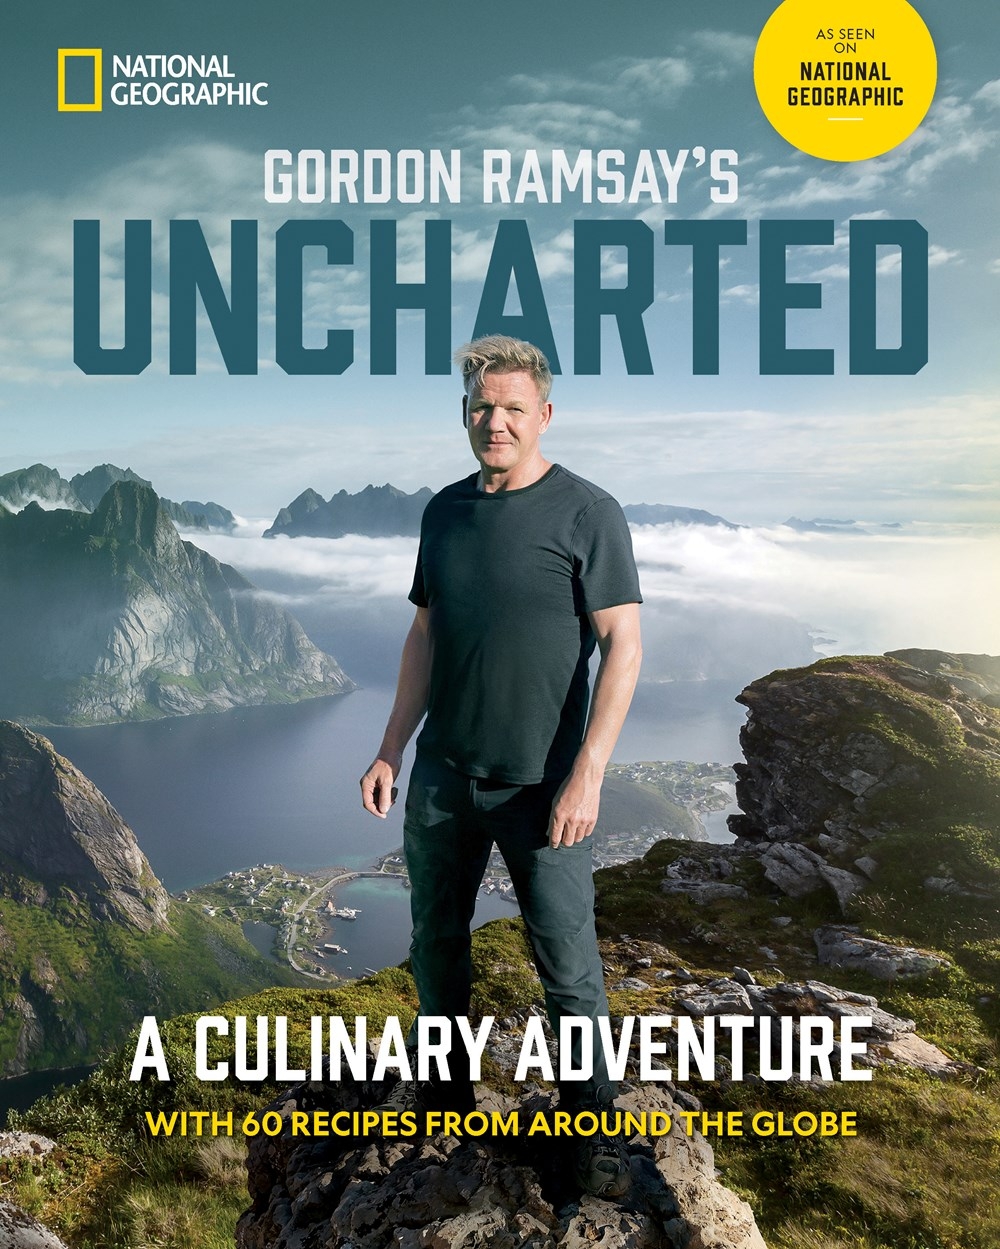 Gordon Ramsay’s Uncharted: A Culinary Adventure with Recipes from Around the Globe